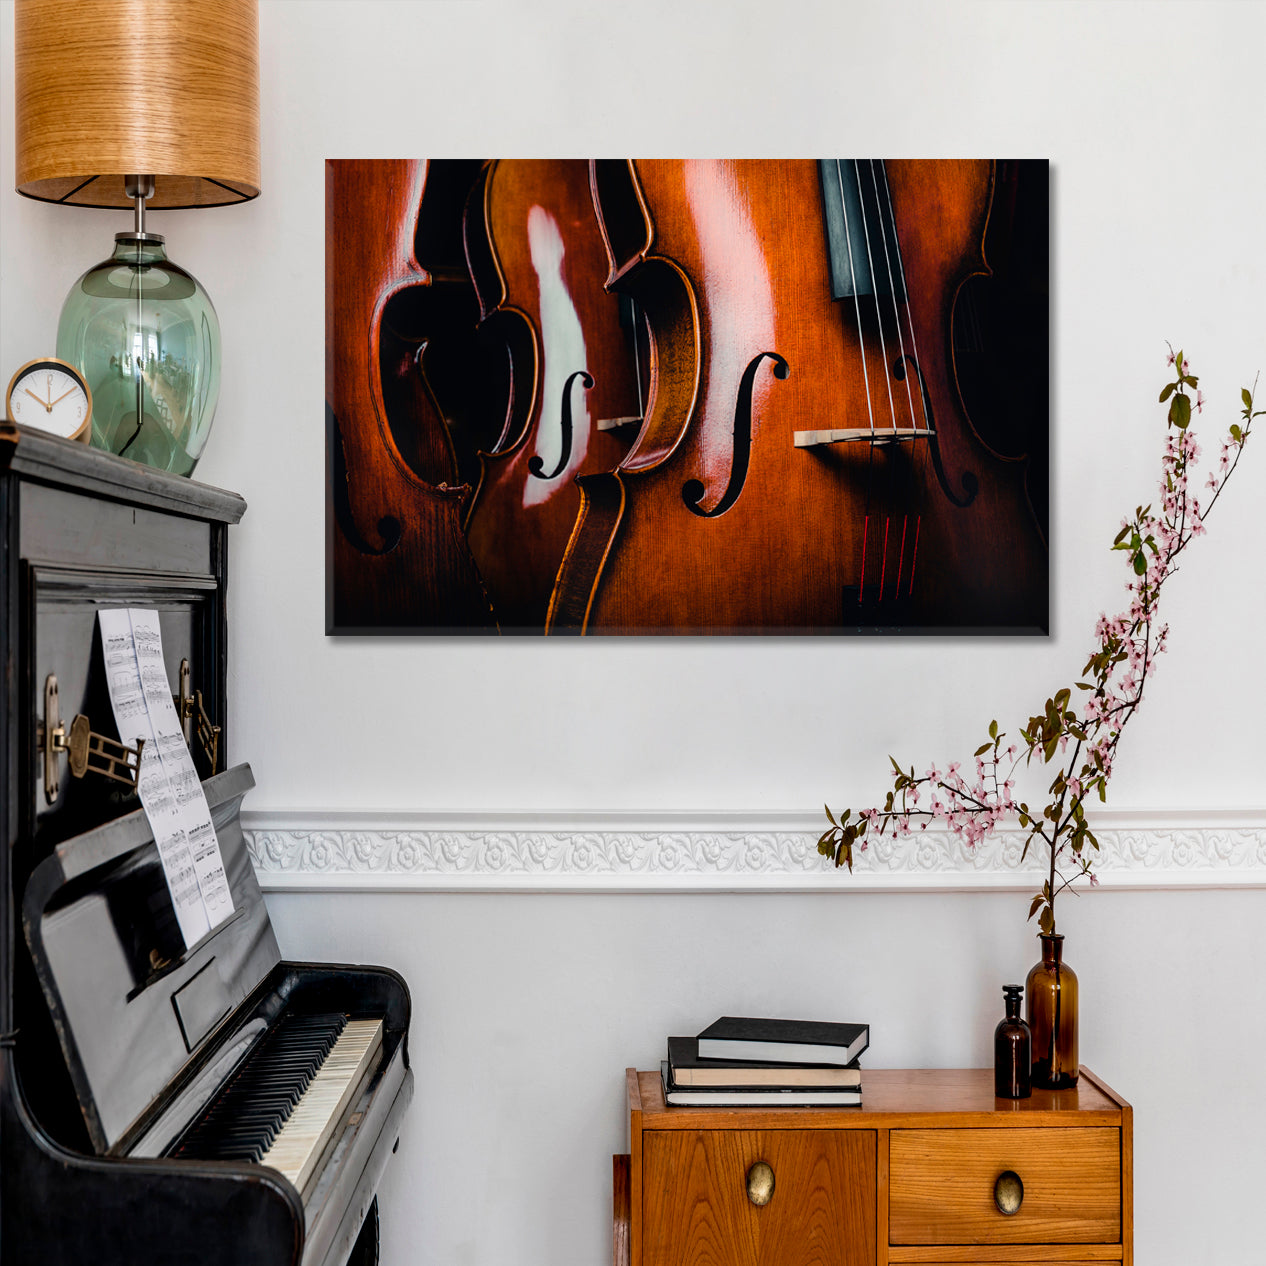 CELLO SYMPHONY Classic Violins Beauty of Music Music Wall Panels Artesty 1 panel 24" x 16" 